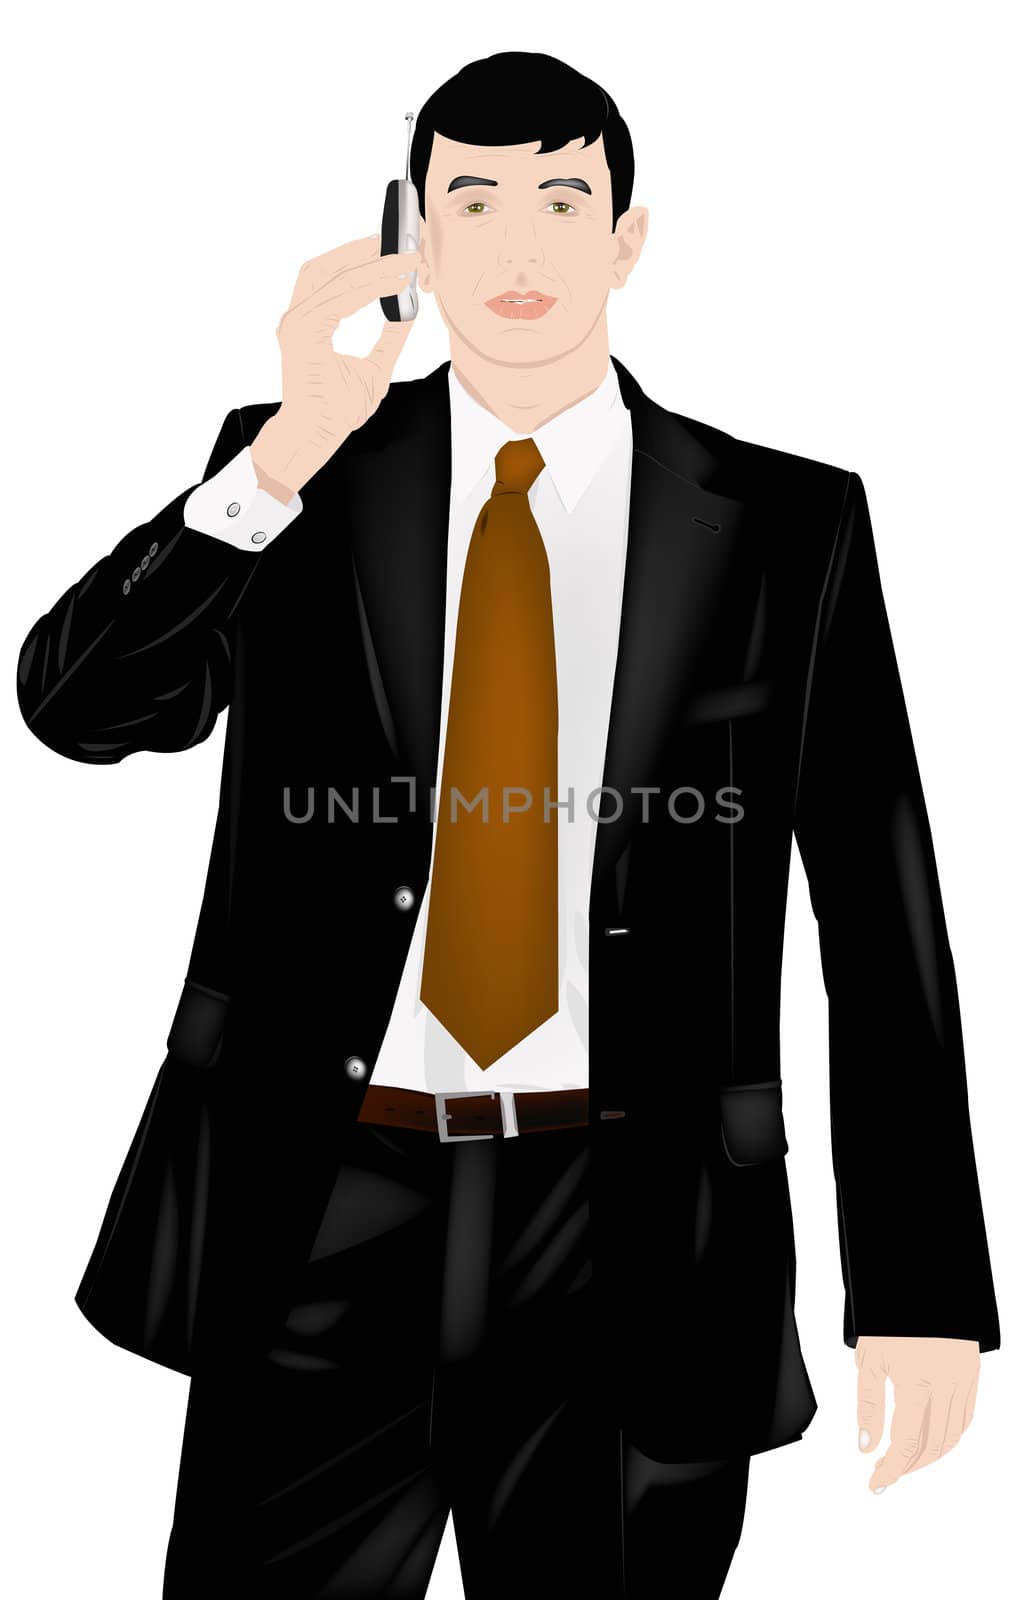 The successful businessman prefers reliable cellular communication for business dealing